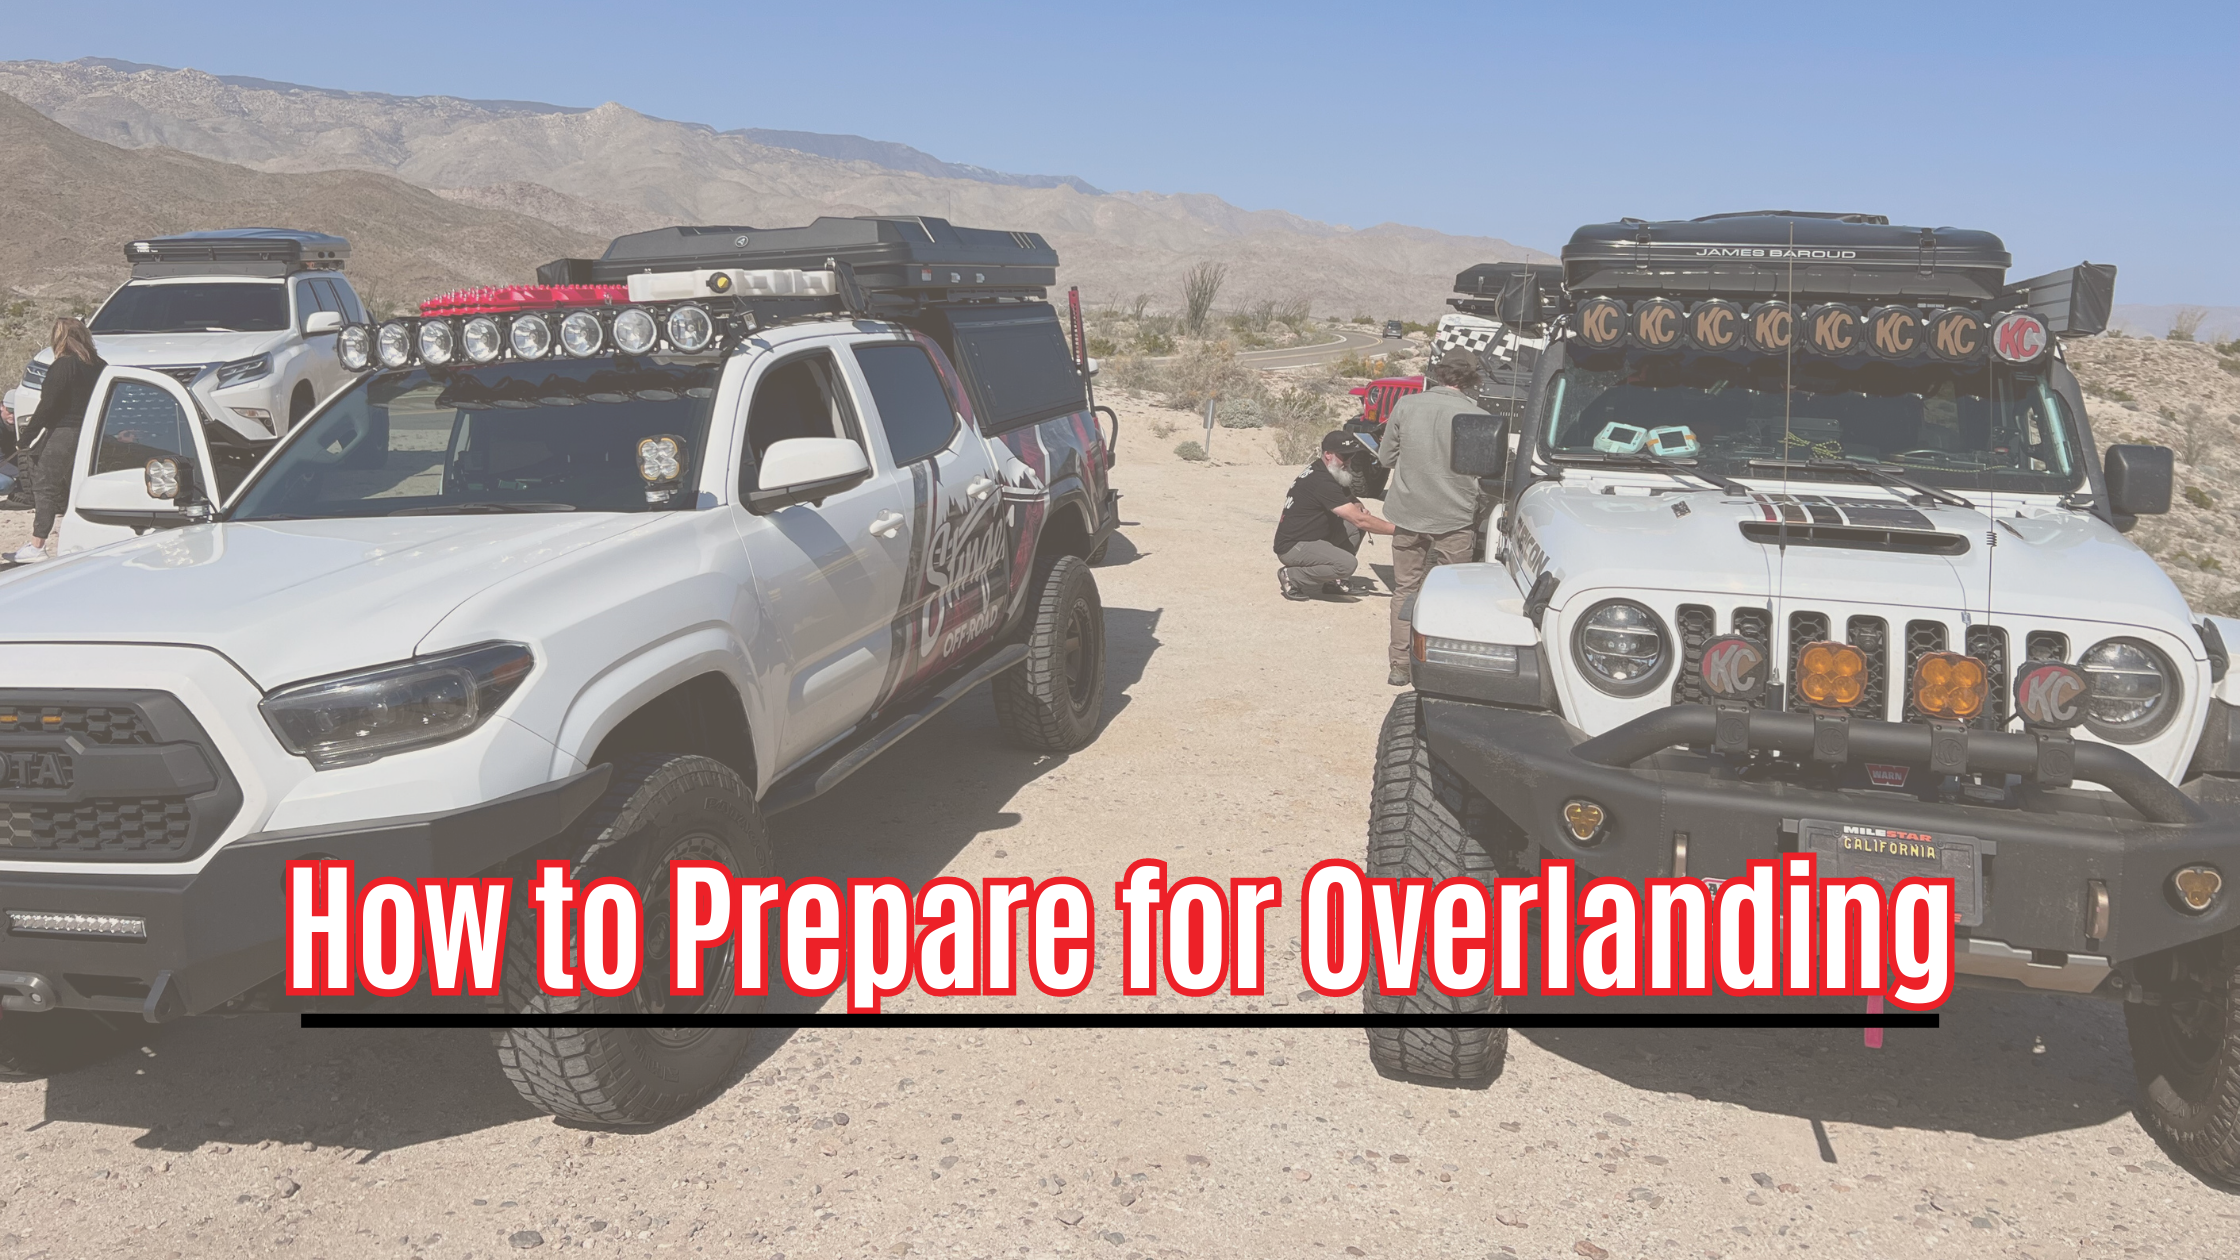 How to Prepare for Overlanding